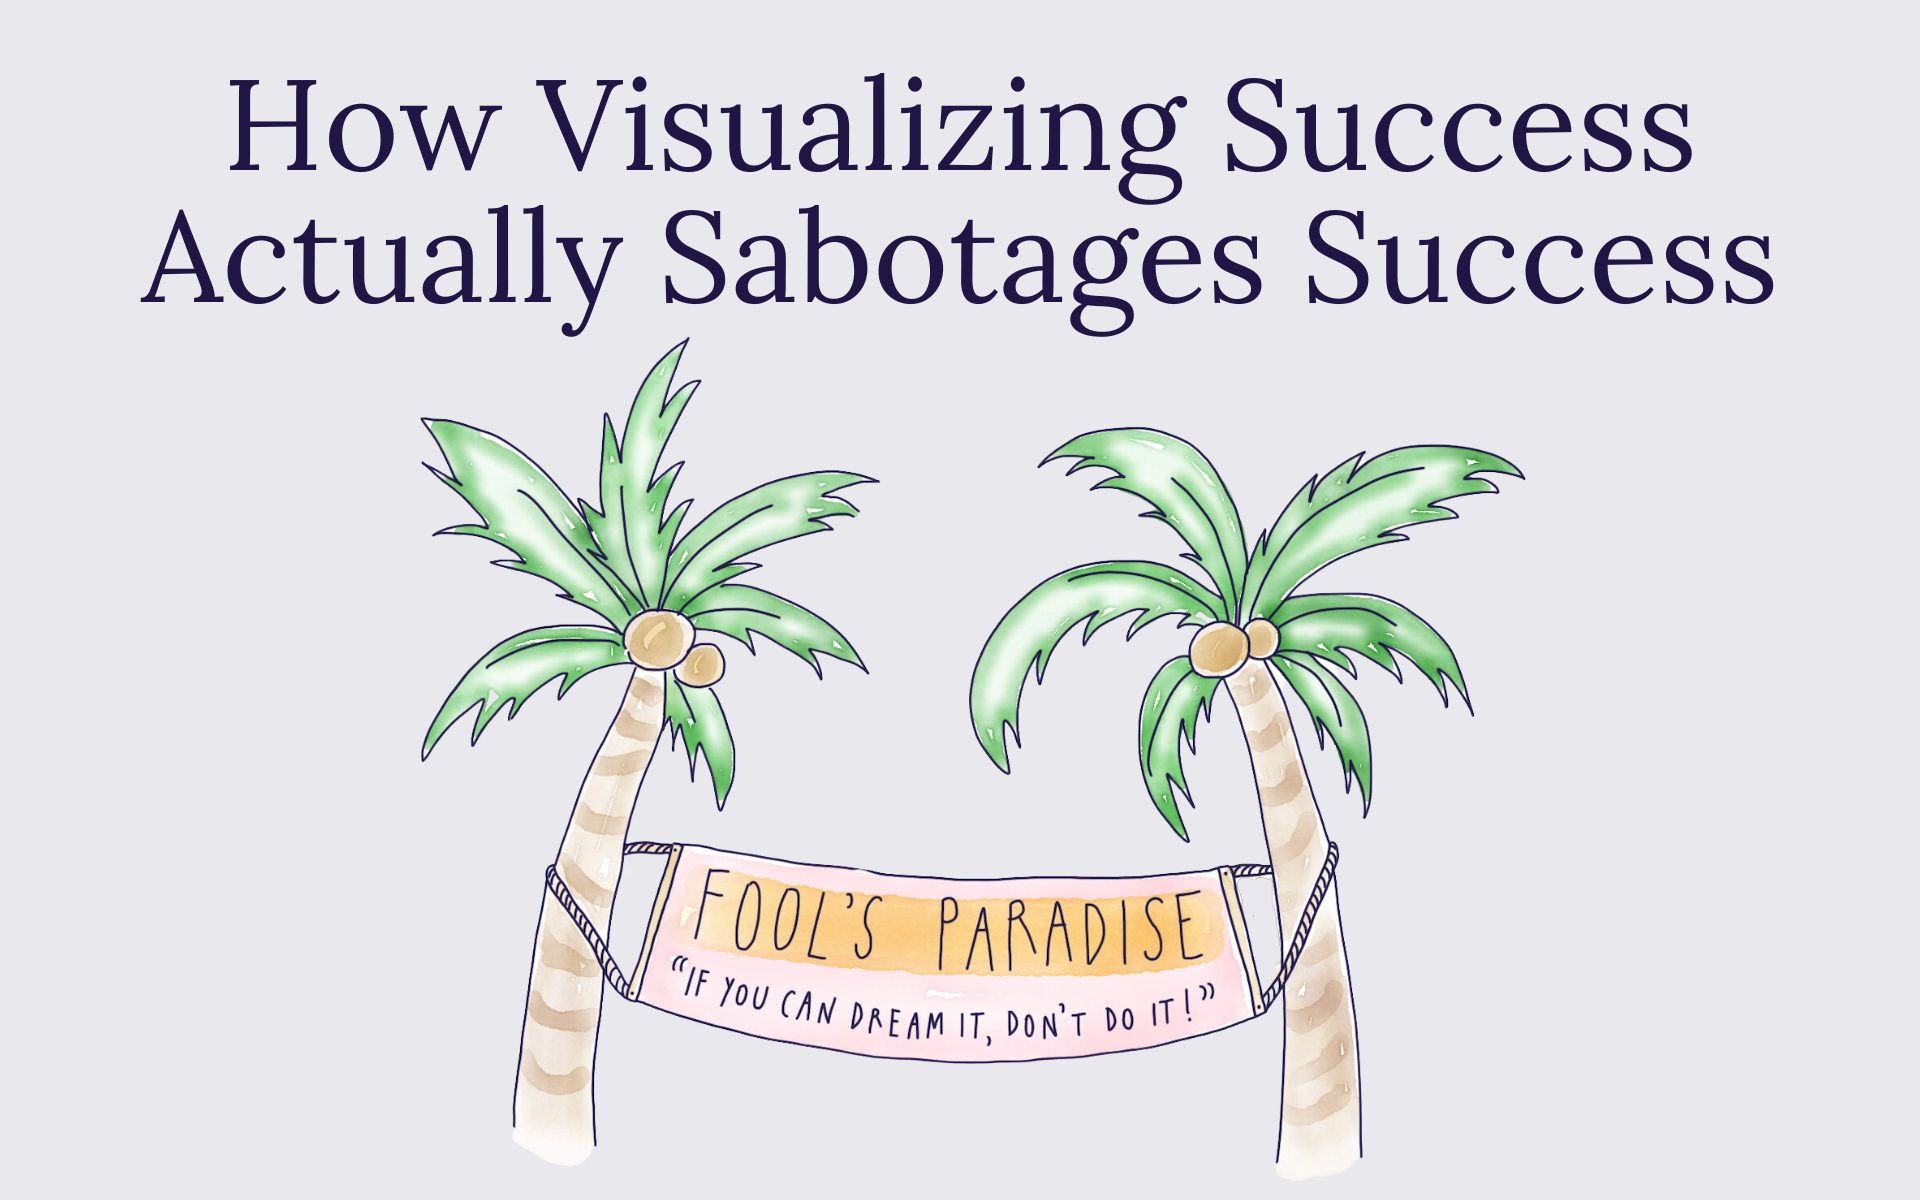 How Visualizing Success Actually Sabotages Success